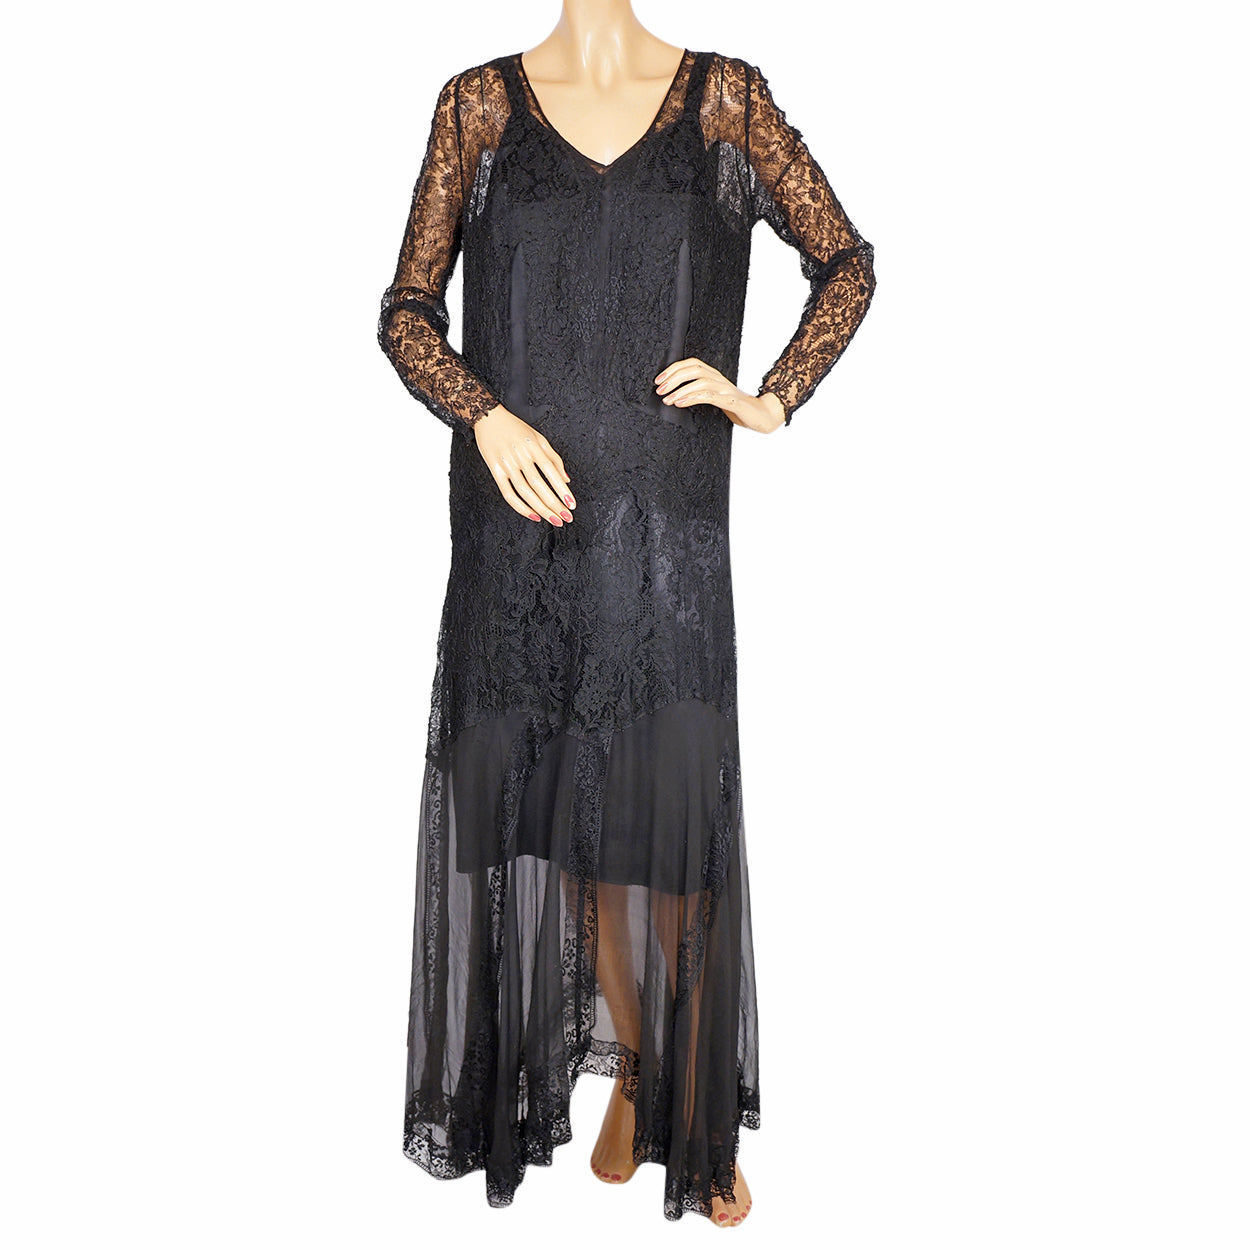 Vintage 1920s Black Chiffon and Lace Dress, fits 38 inch bust